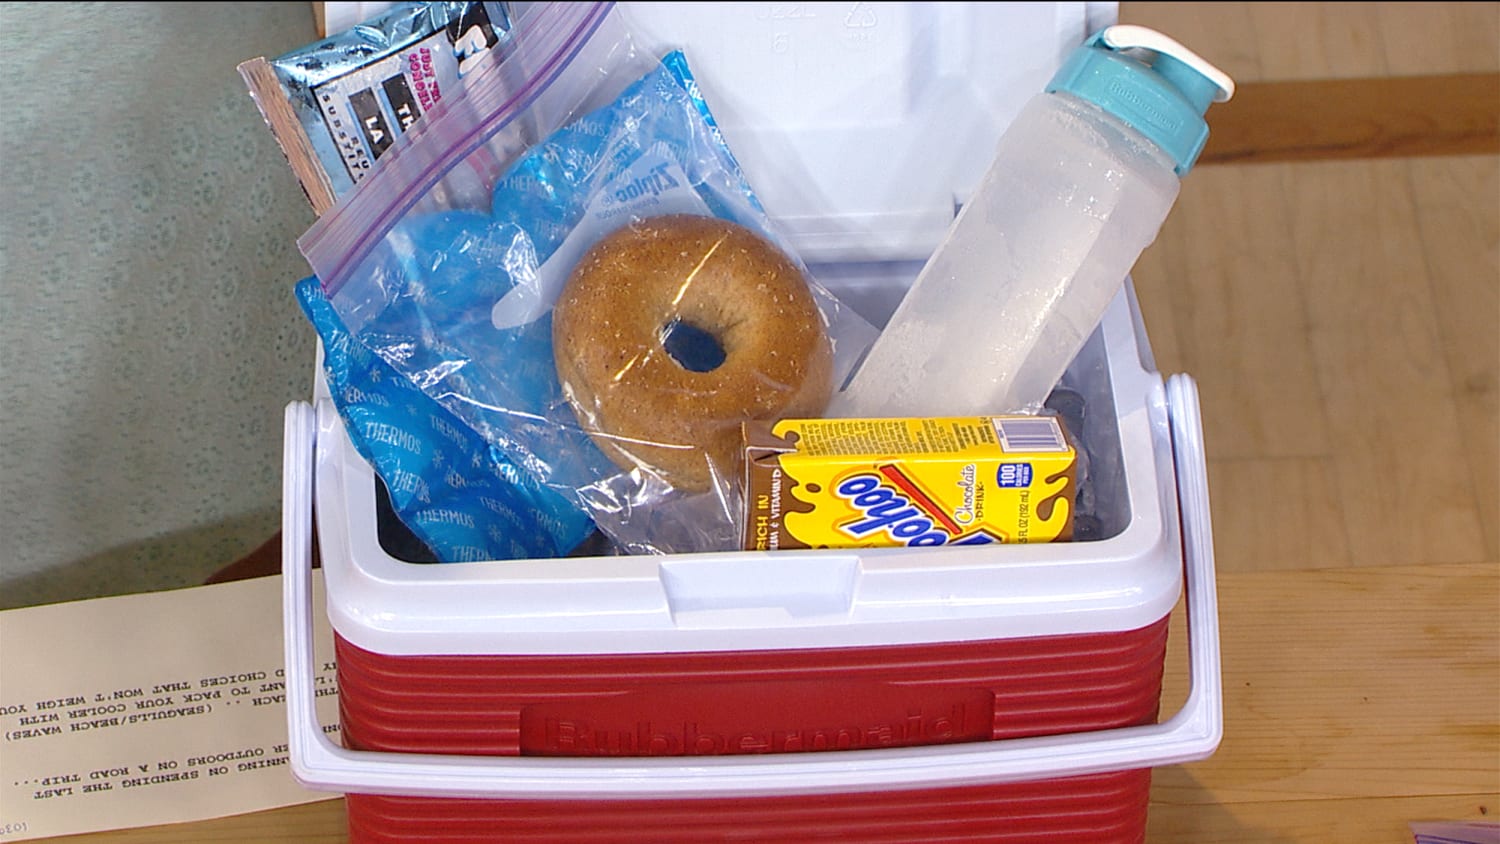 How to Pack a Cooler So You Don't End Up With Soggy, Spoiled Food